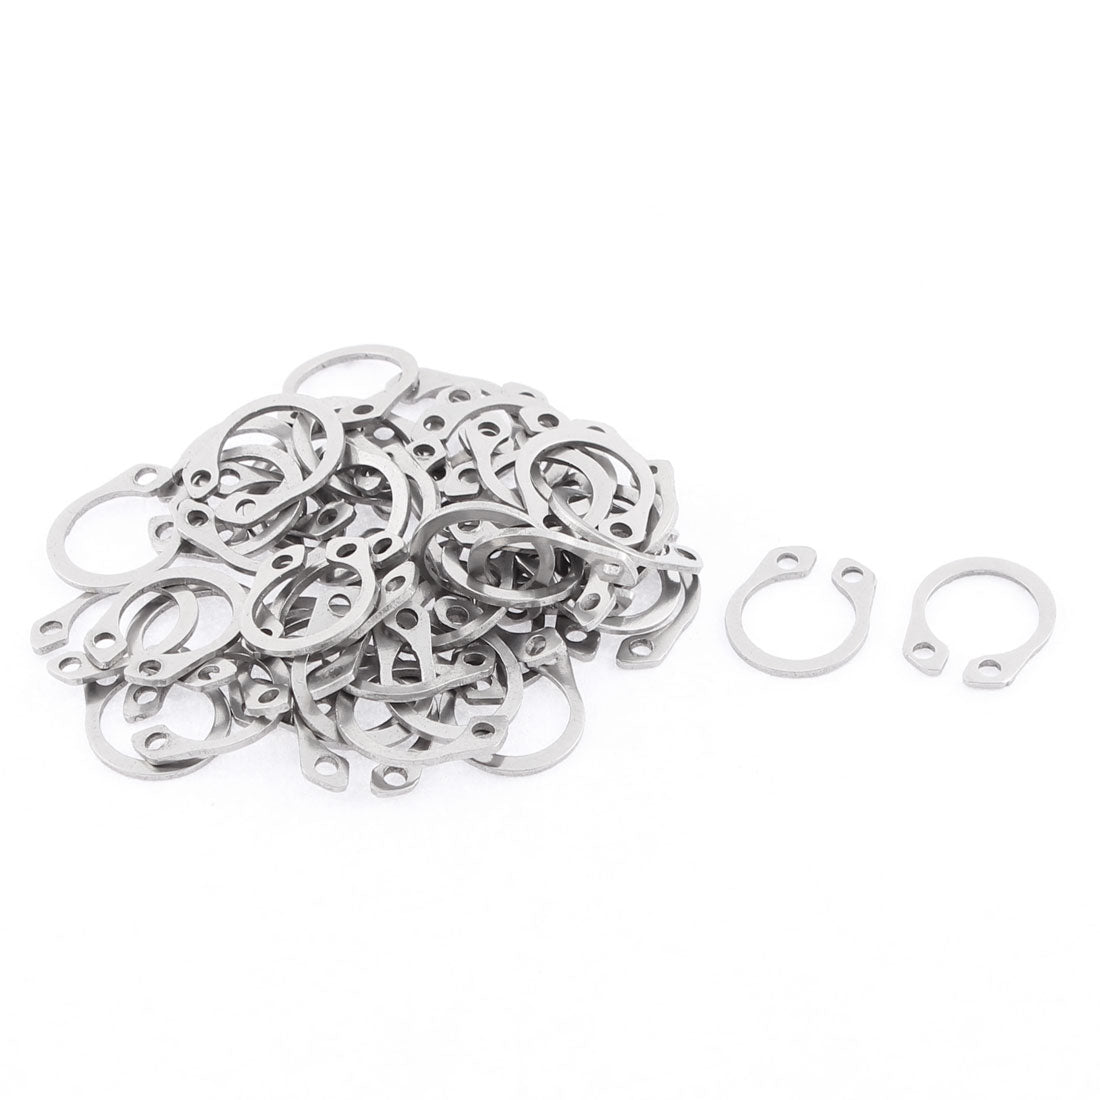 uxcell Uxcell 11mm Stainless Steel External Internal Circlips C-Clip Retaining Snap Rings 50pcs